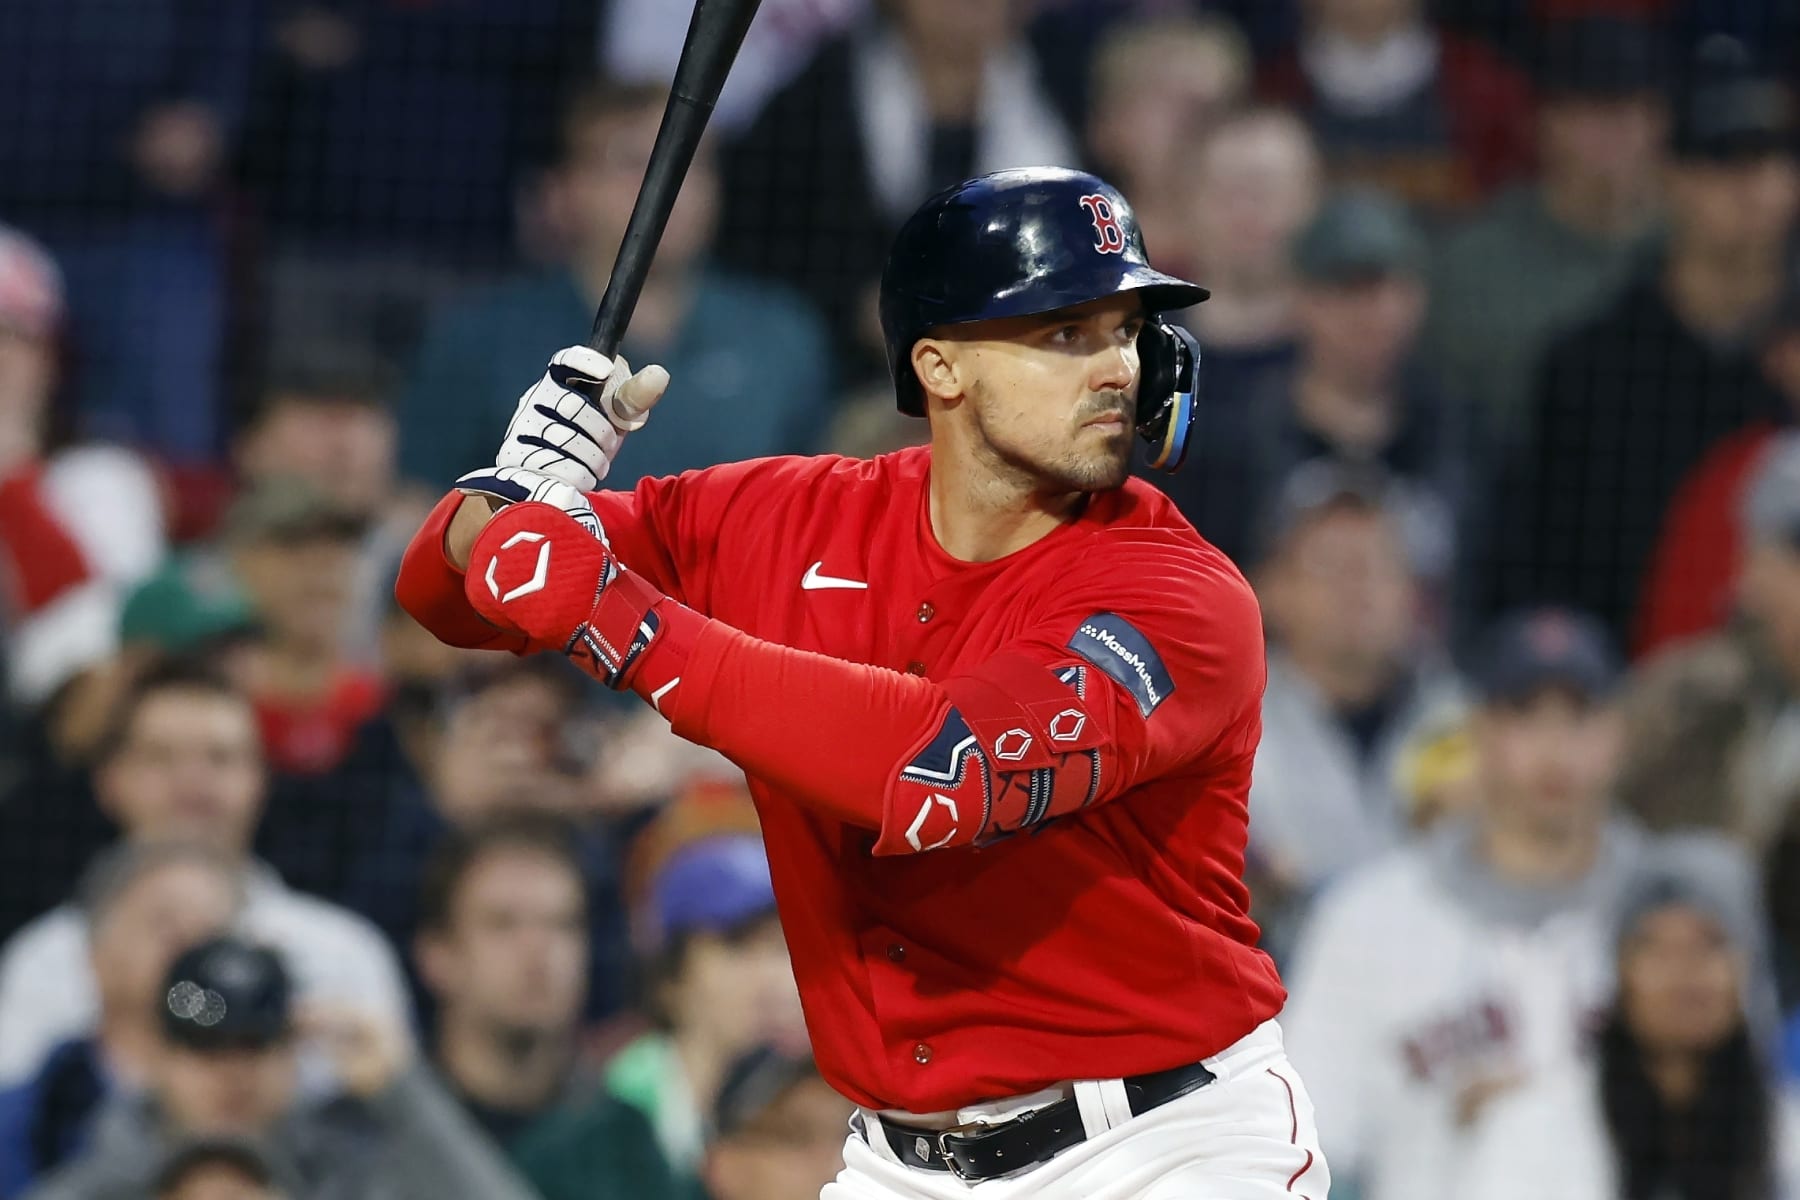 Adam Duvall earns MLB honor after historic start with Red Sox